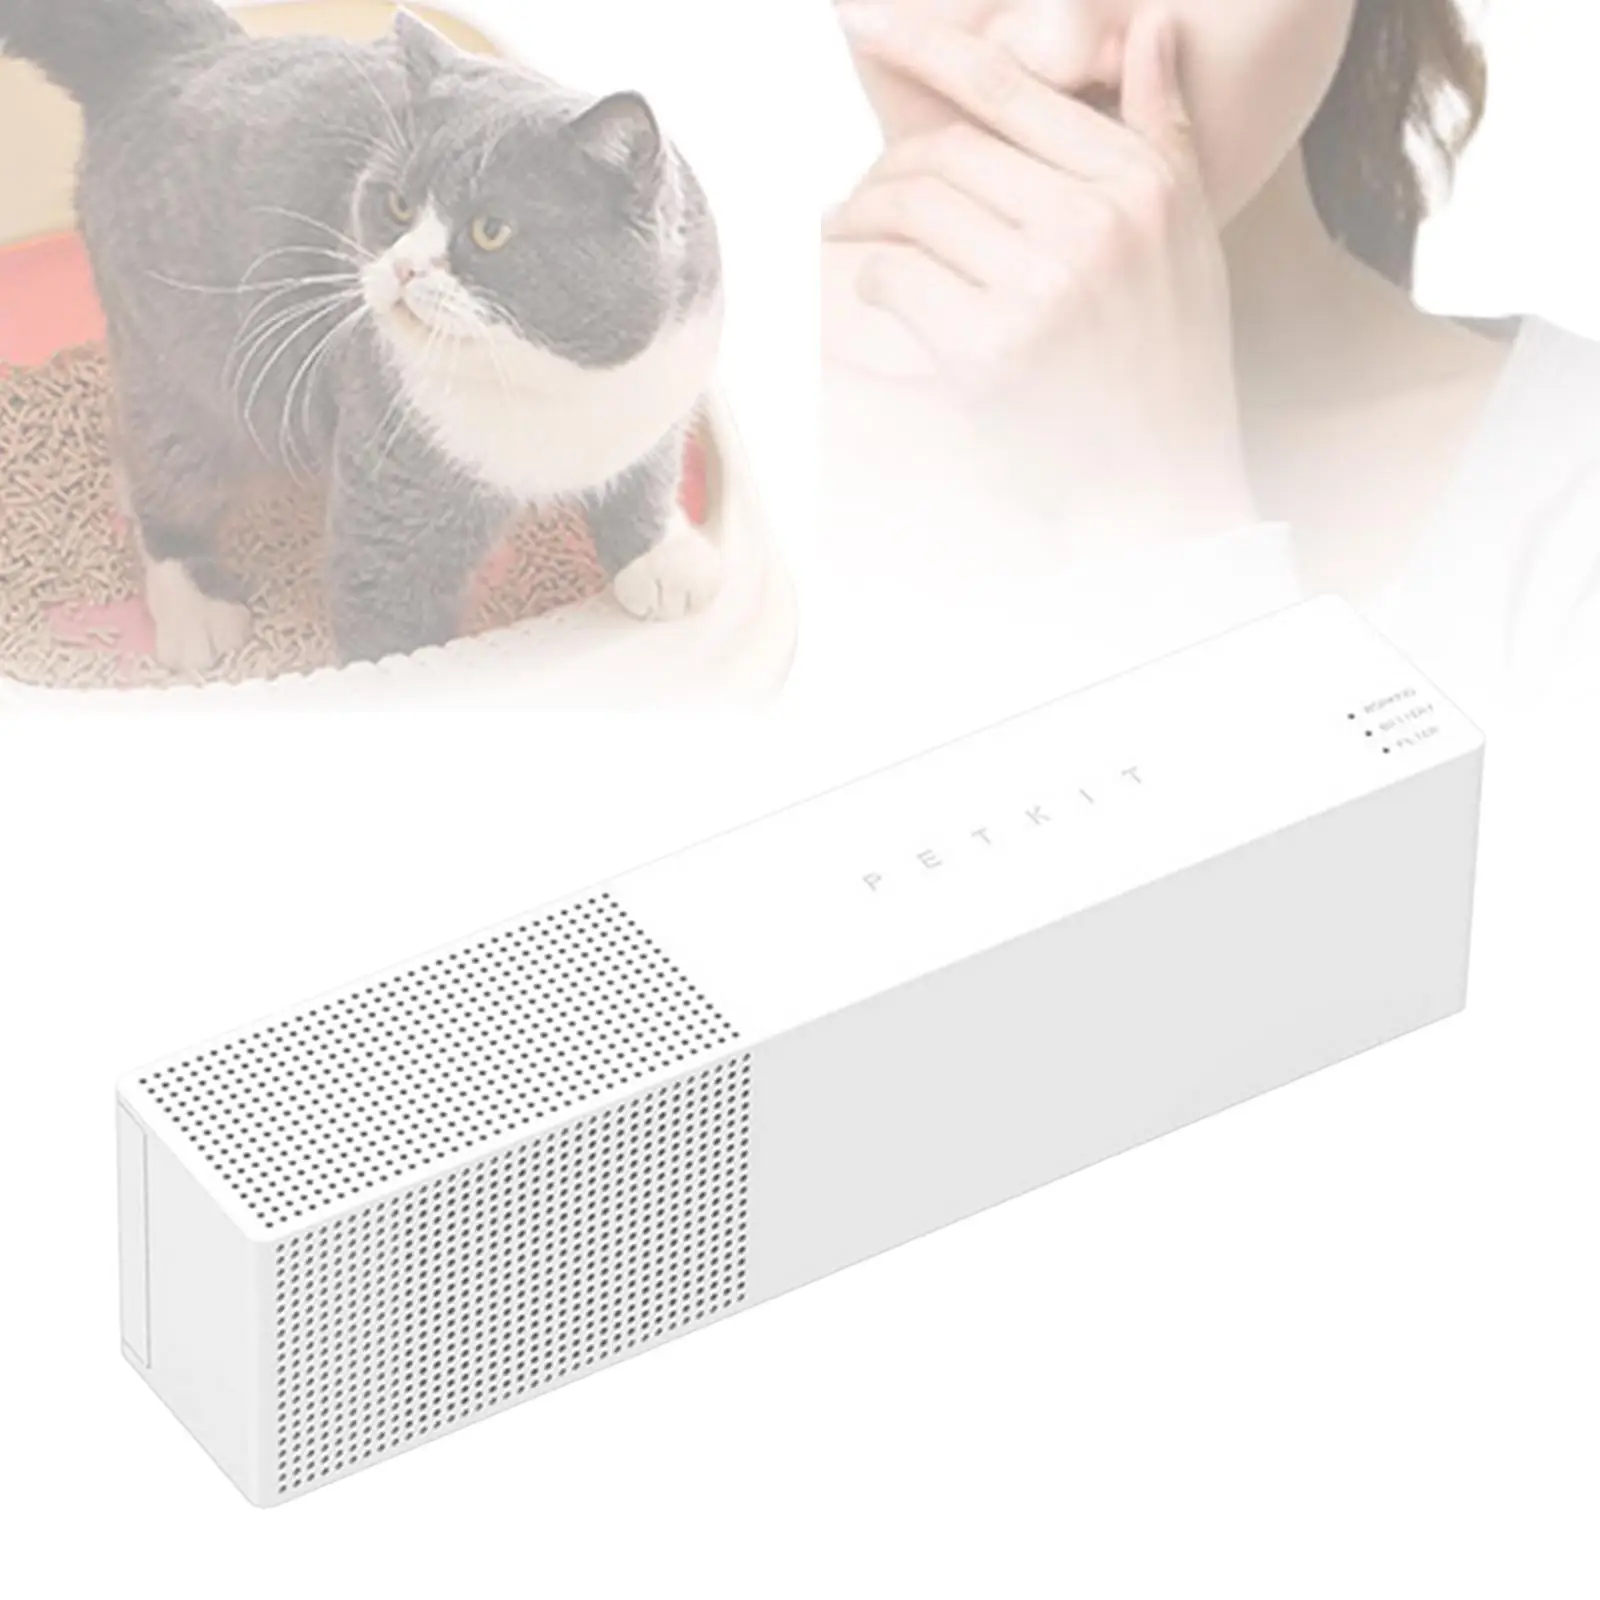 Pets Odor Eliminator Cat Litter Freshener Portable Pets Deodorization Wall Mounted Cat Litter Odor Remover for Home